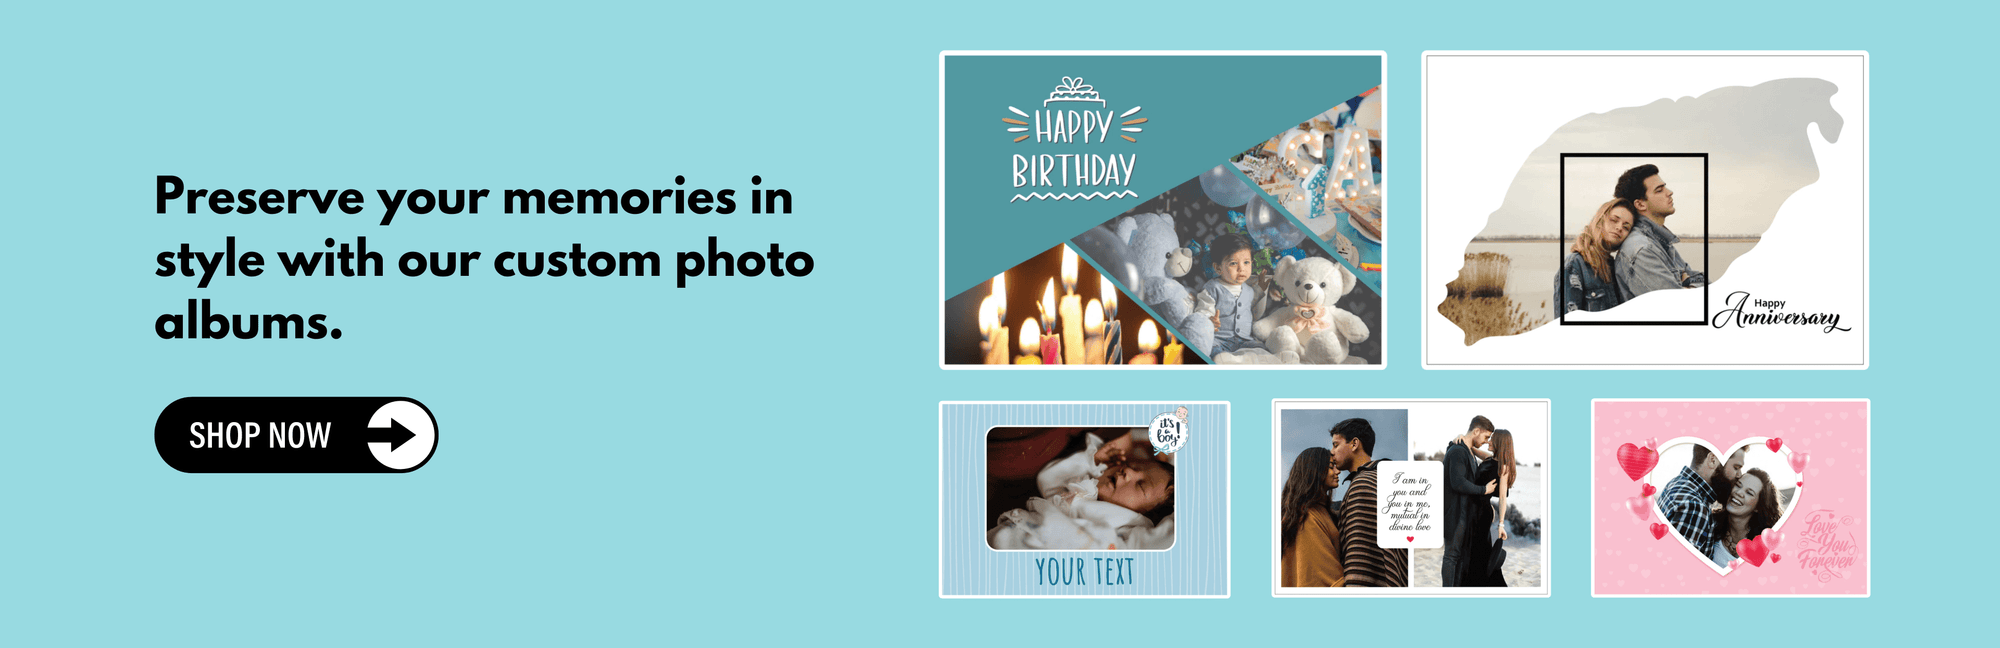 Preserve your memories in style with our custom photo albums.